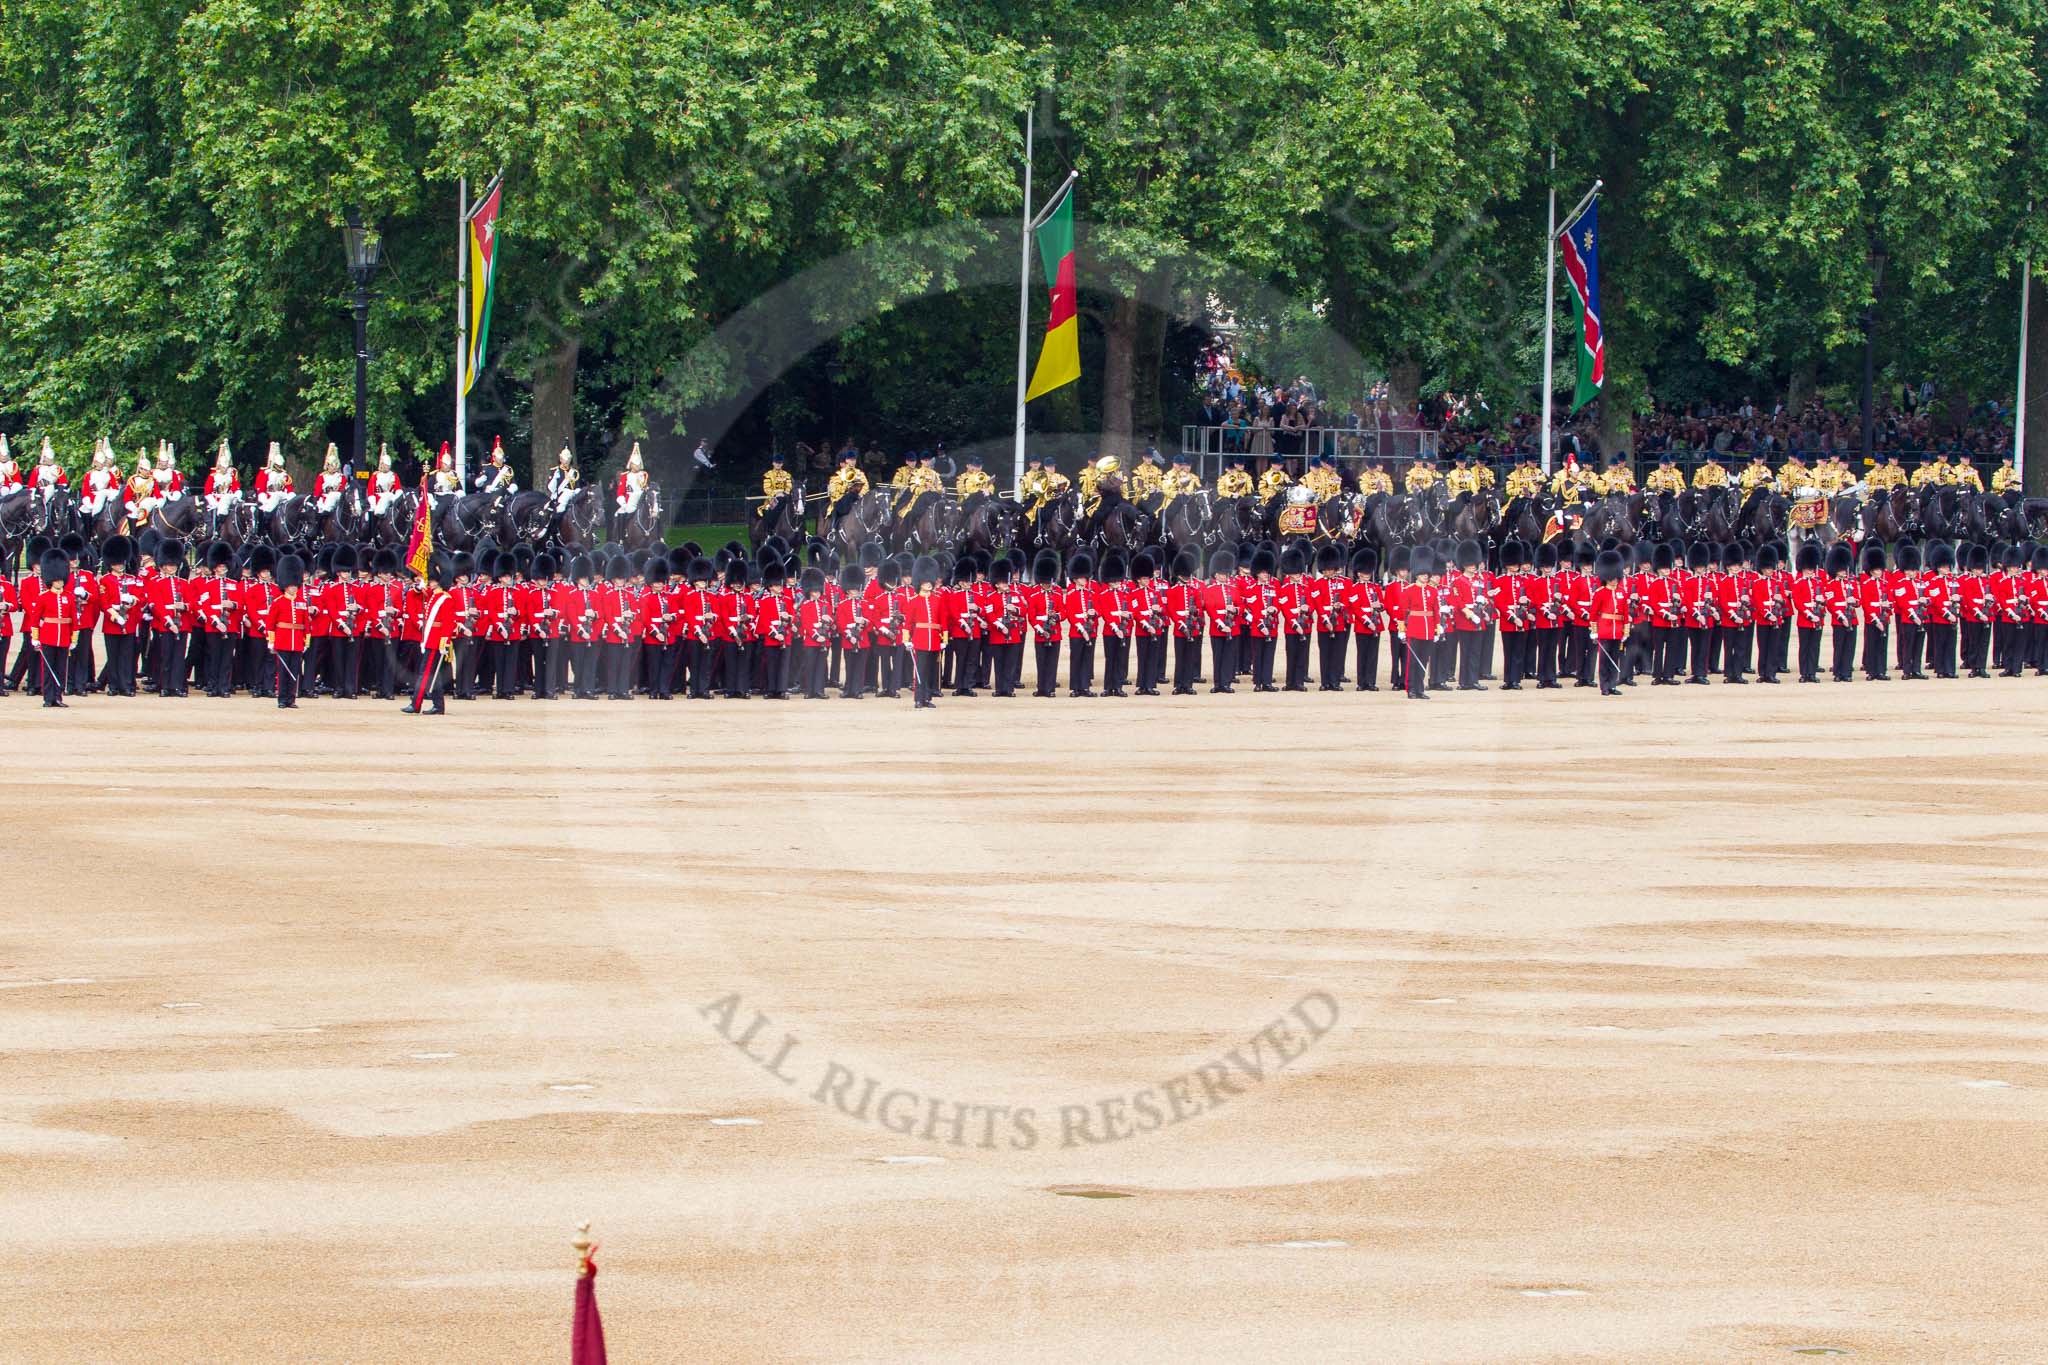 Trooping the Colour 2014.
Horse Guards Parade, Westminster,
London SW1A,

United Kingdom,
on 14 June 2014 at 11:27, image #570